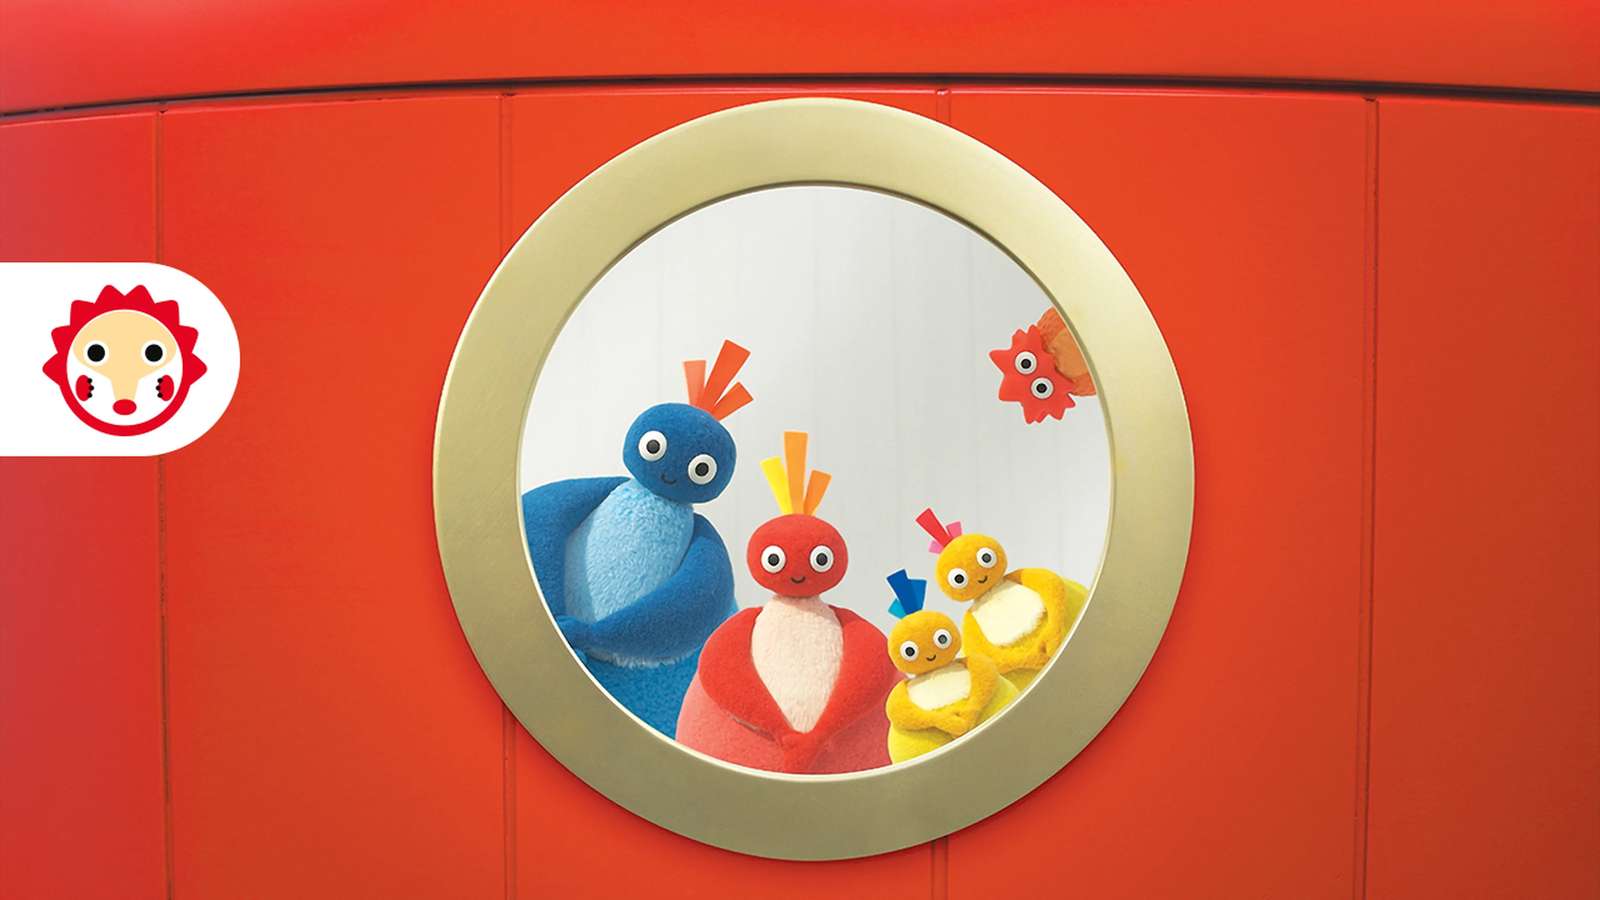 Twirlywoos: ABC iview Online-Puzzle